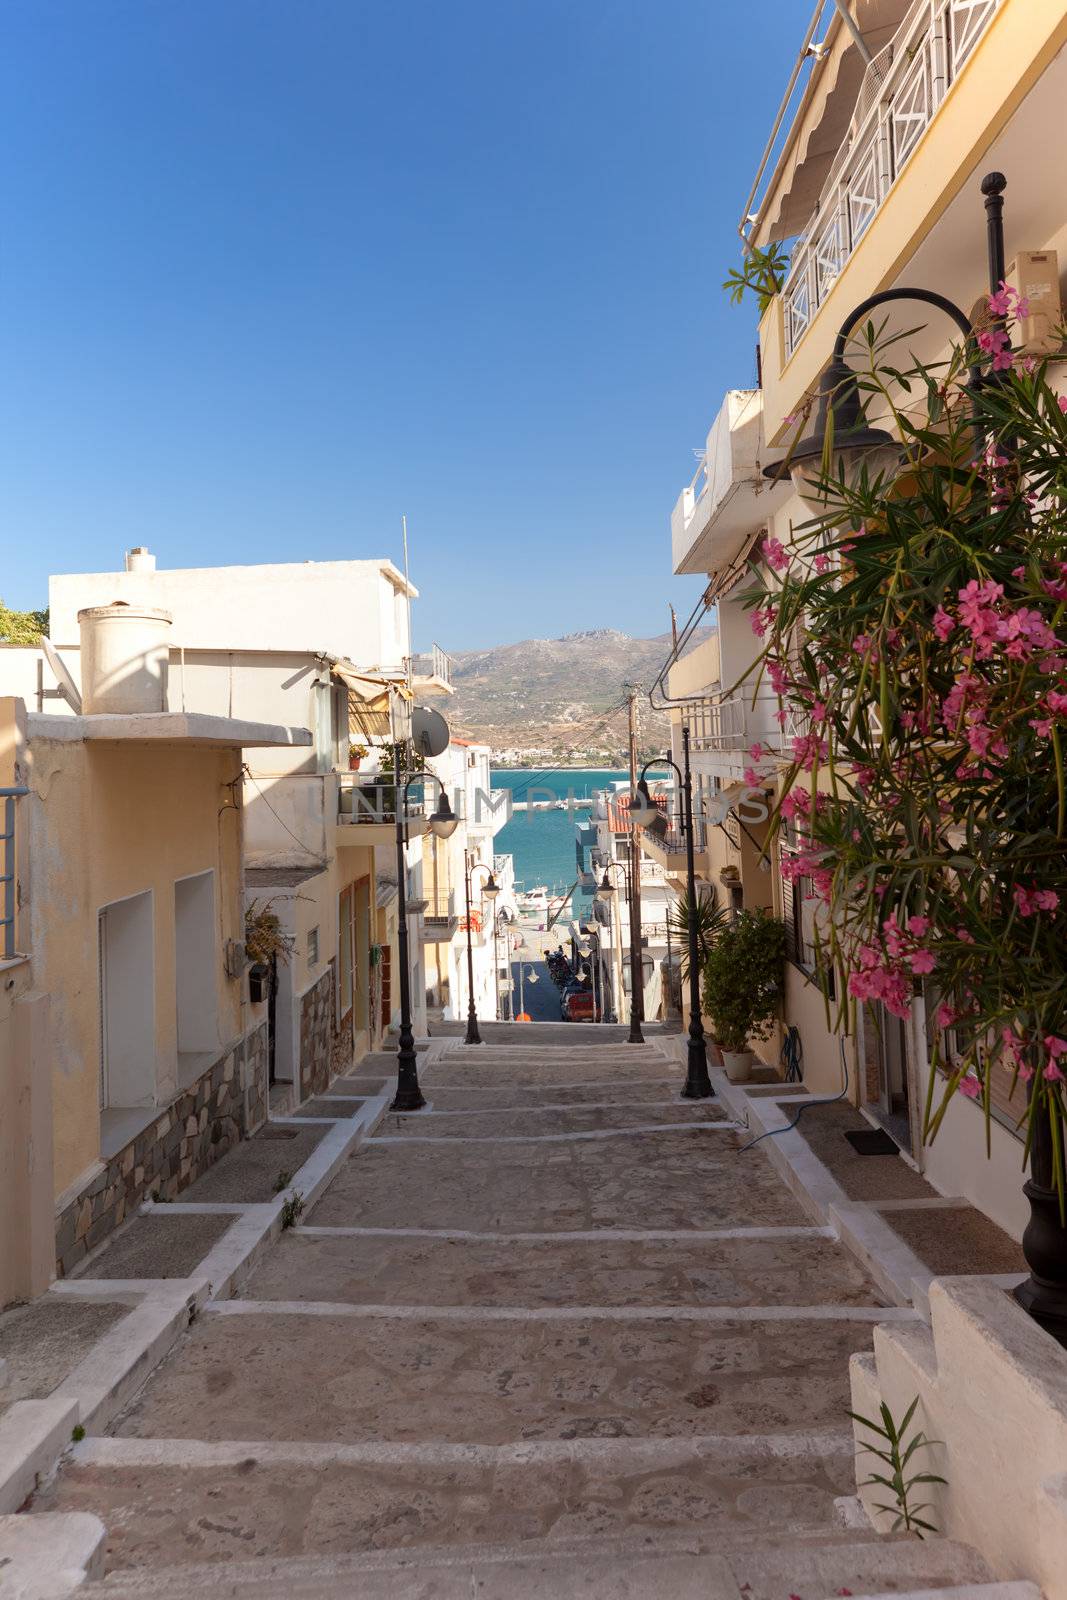 A walking path with steps in the town of Sitia